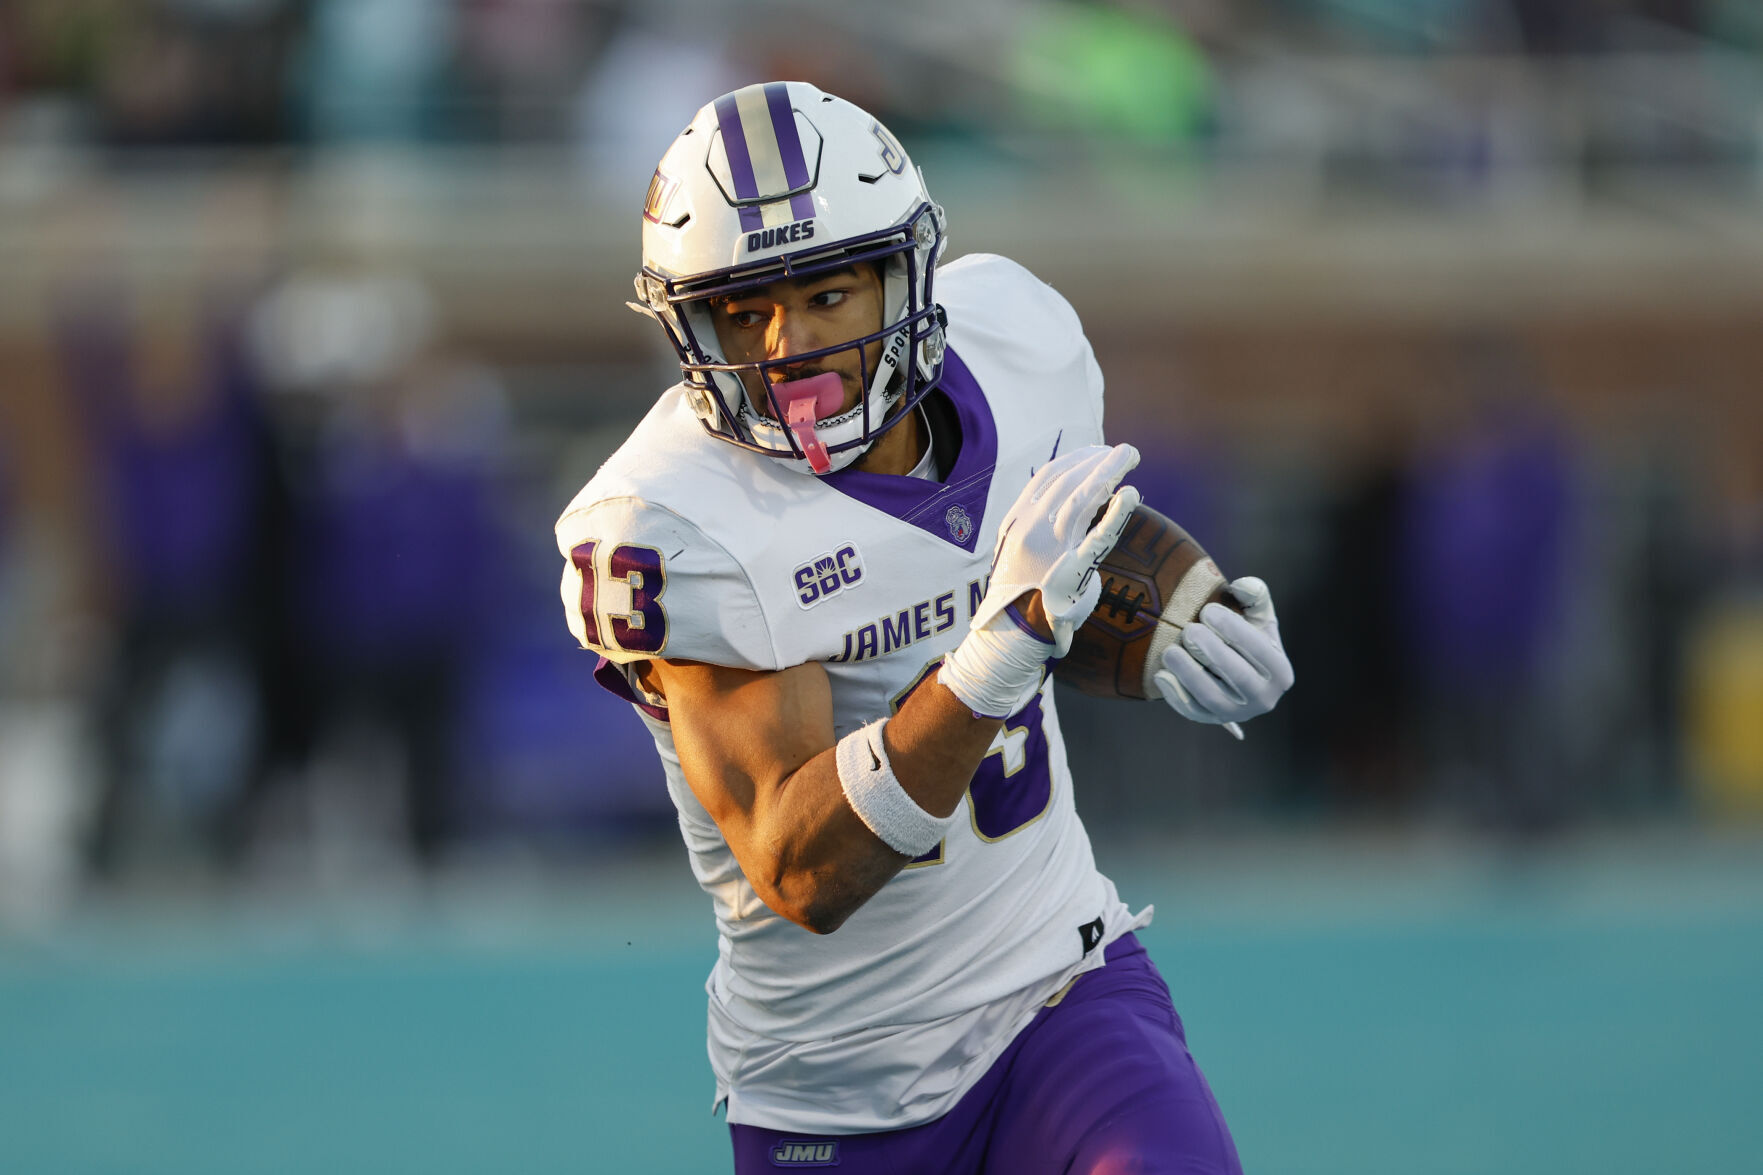 Newcomers James Madison and Jacksonville State, Along with Minnesota, Qualify for Bowl Games Due to Shortage of Eligible Teams